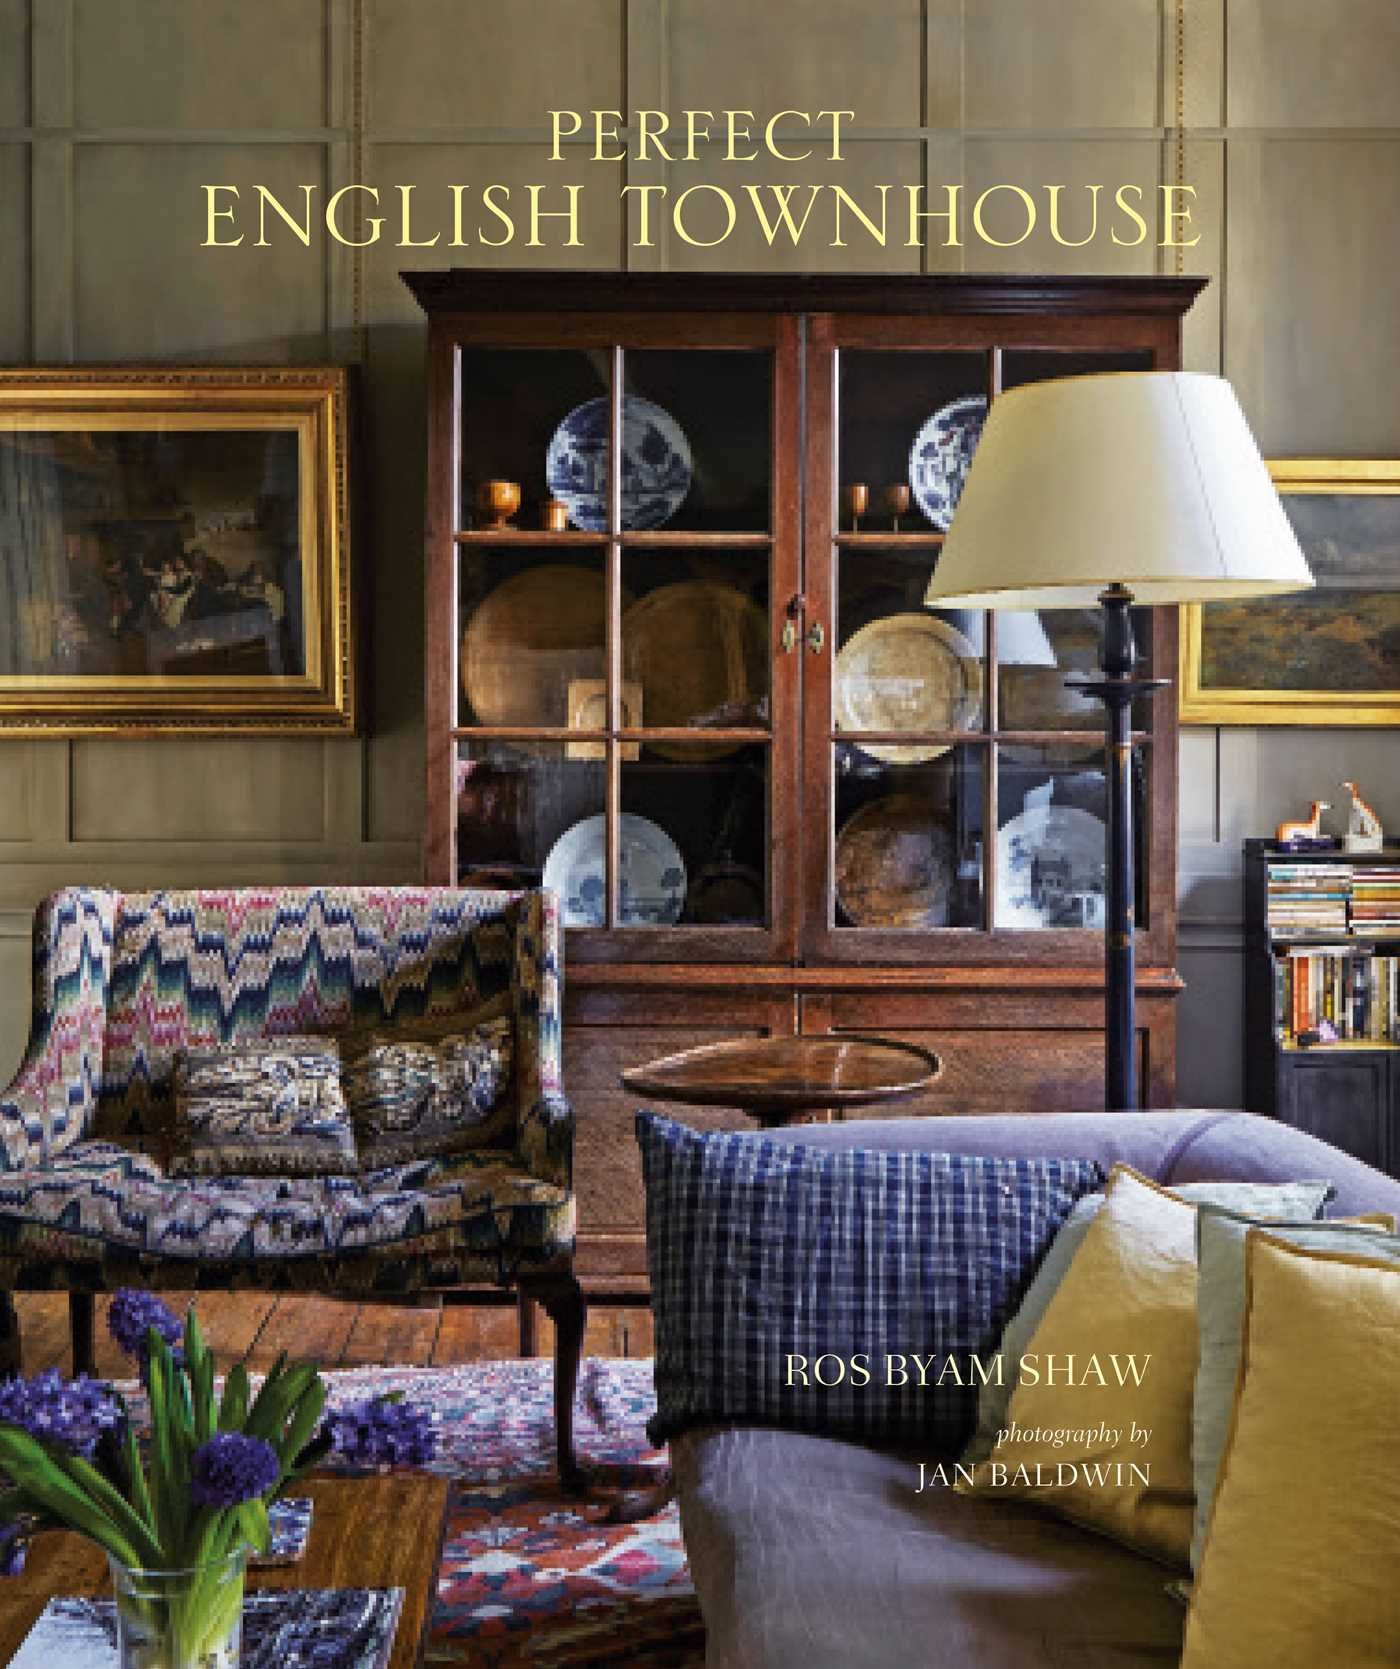 The Perfect English Townhouse | Ros Byam Shaw